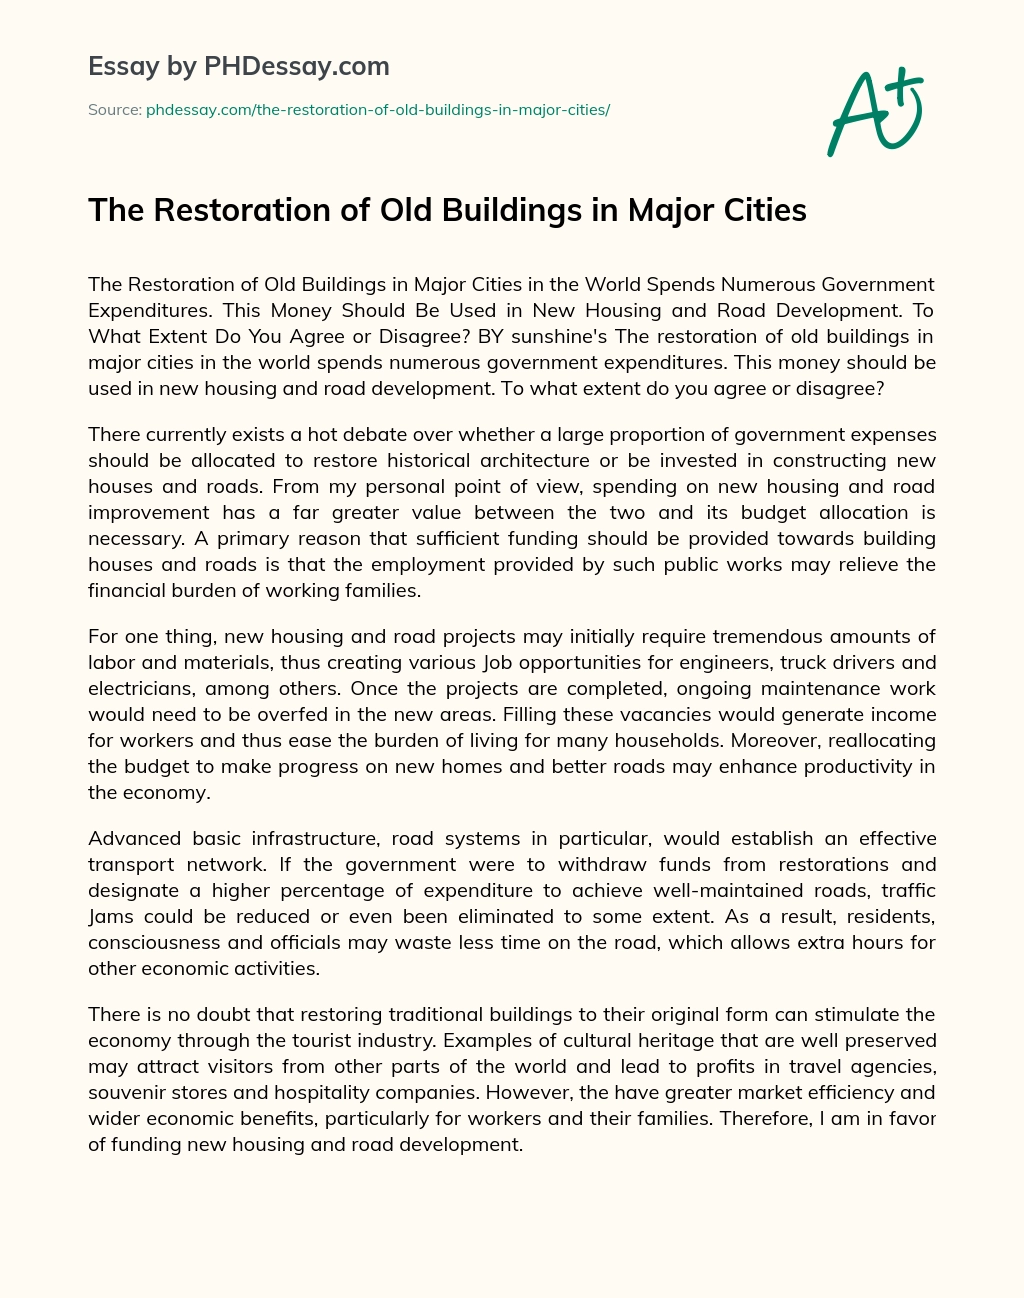 The Restoration of Old Buildings in Major Cities essay